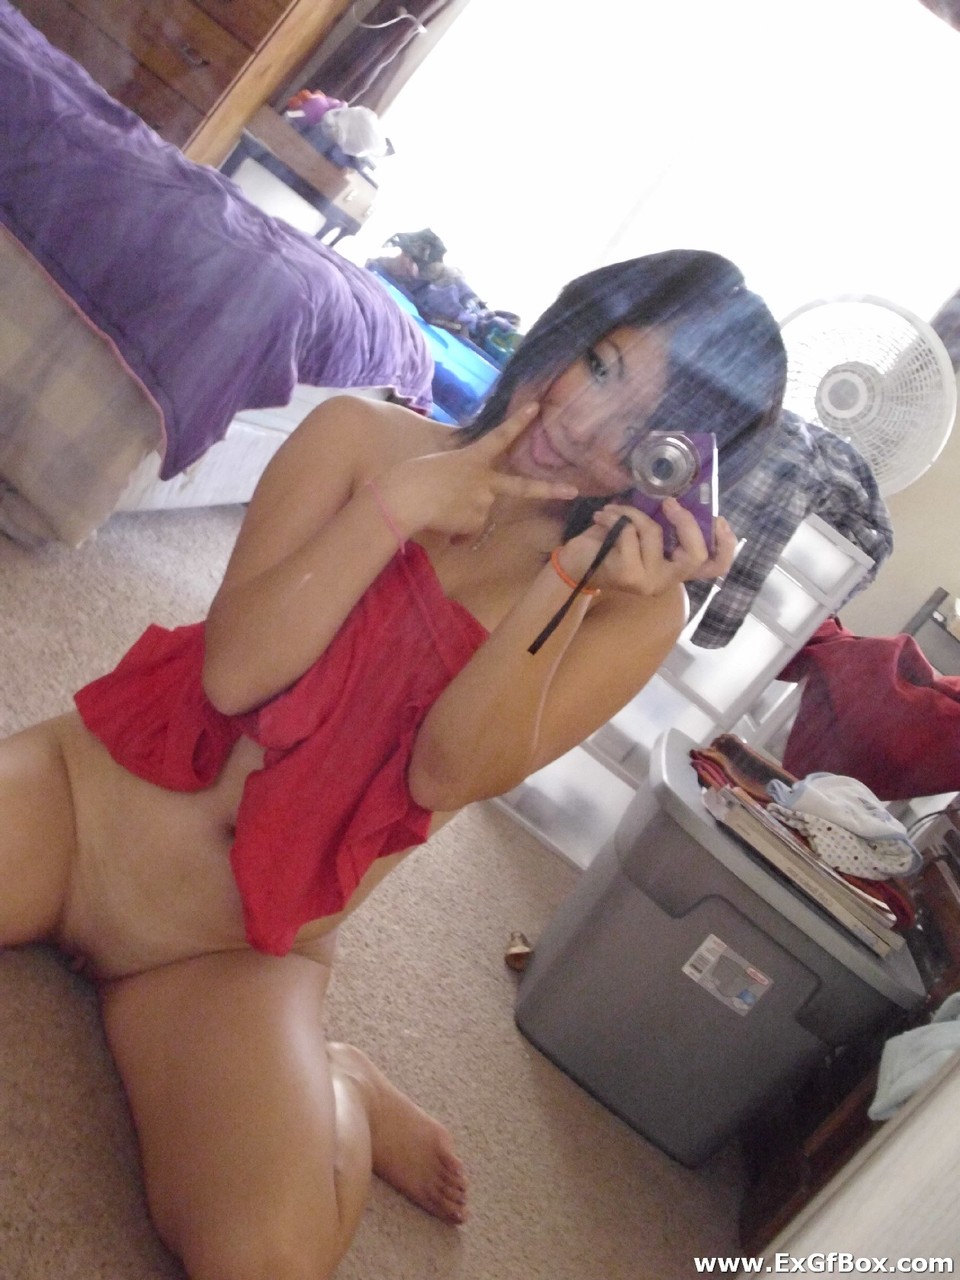 Bootylicious teenage girlfriend takes selfies of her hot body while stripping photo porno #426010469 | Ex GF Box Pics, Selfie, porno mobile